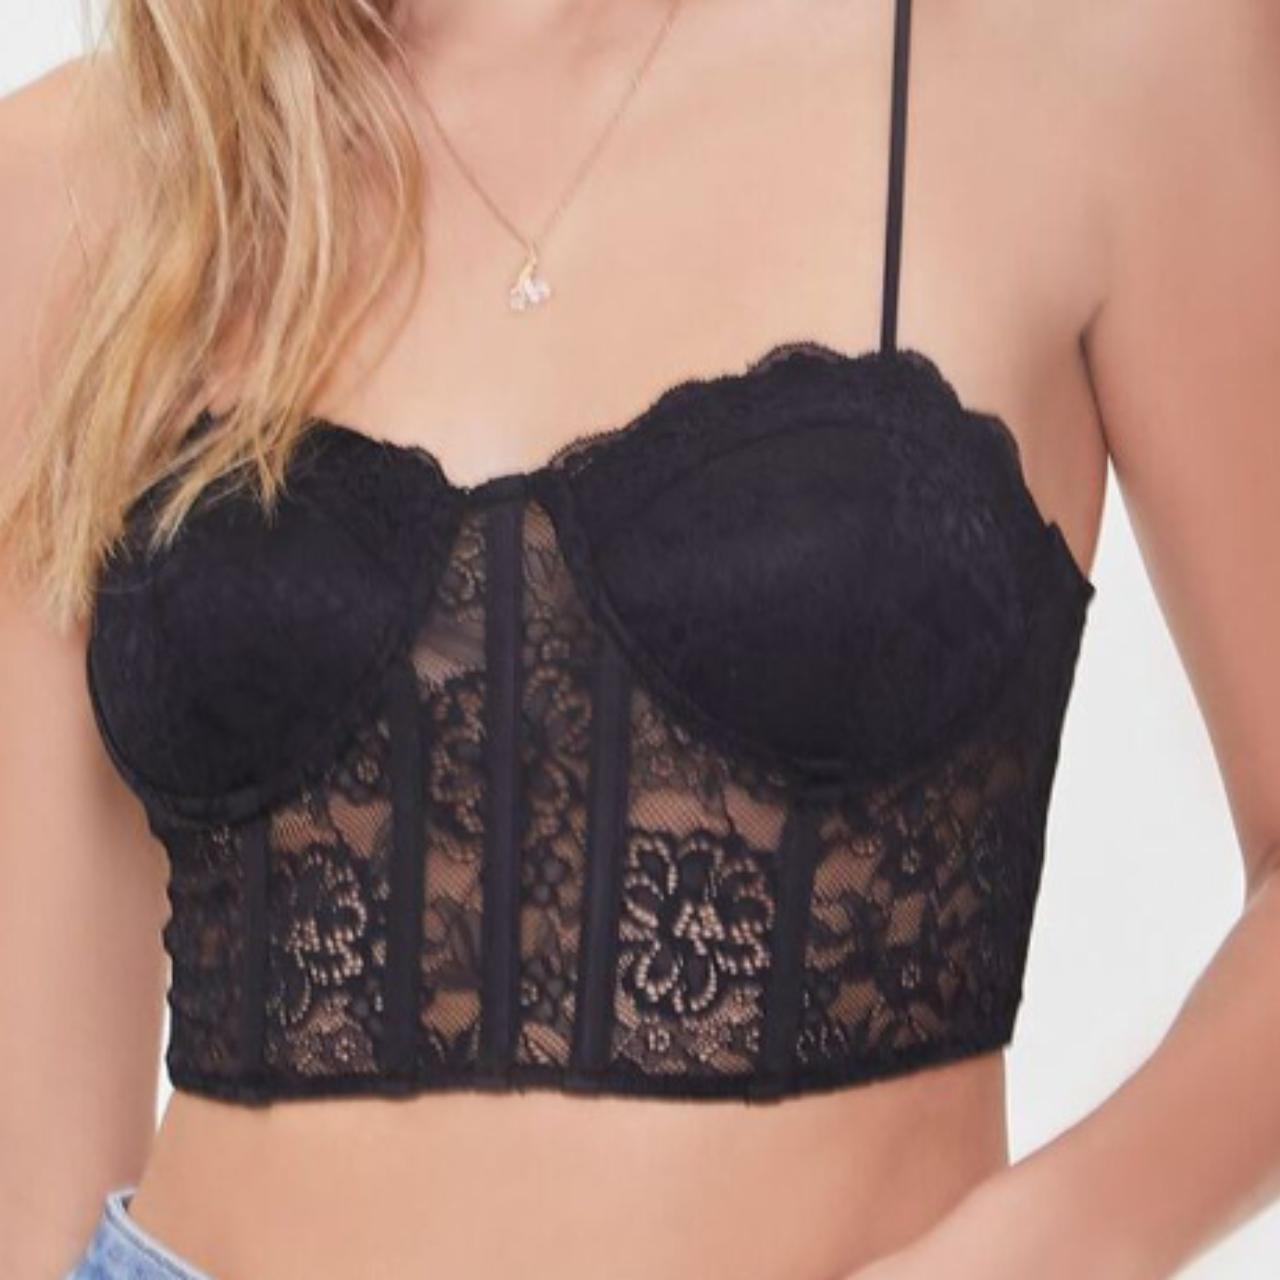 Forever 21,Forever 21 Strapless Underwire Floral Lace Bralette